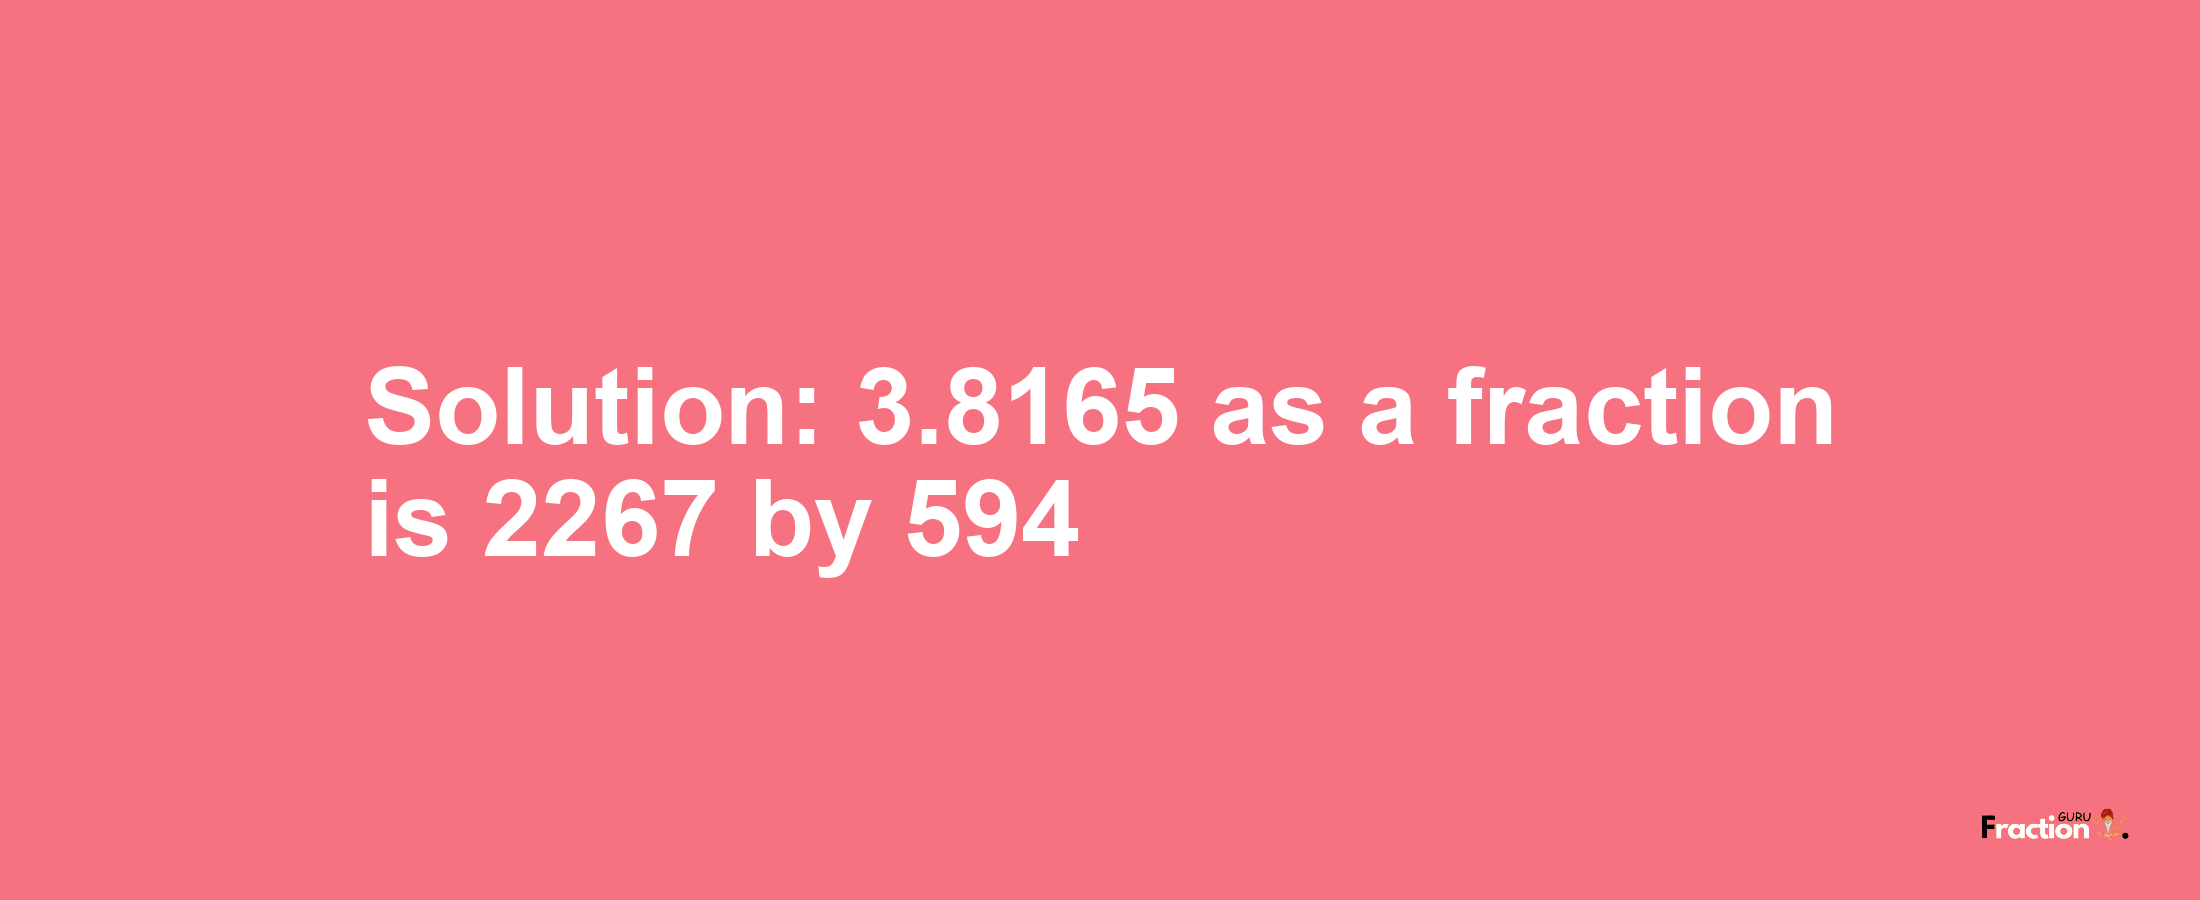 Solution:3.8165 as a fraction is 2267/594